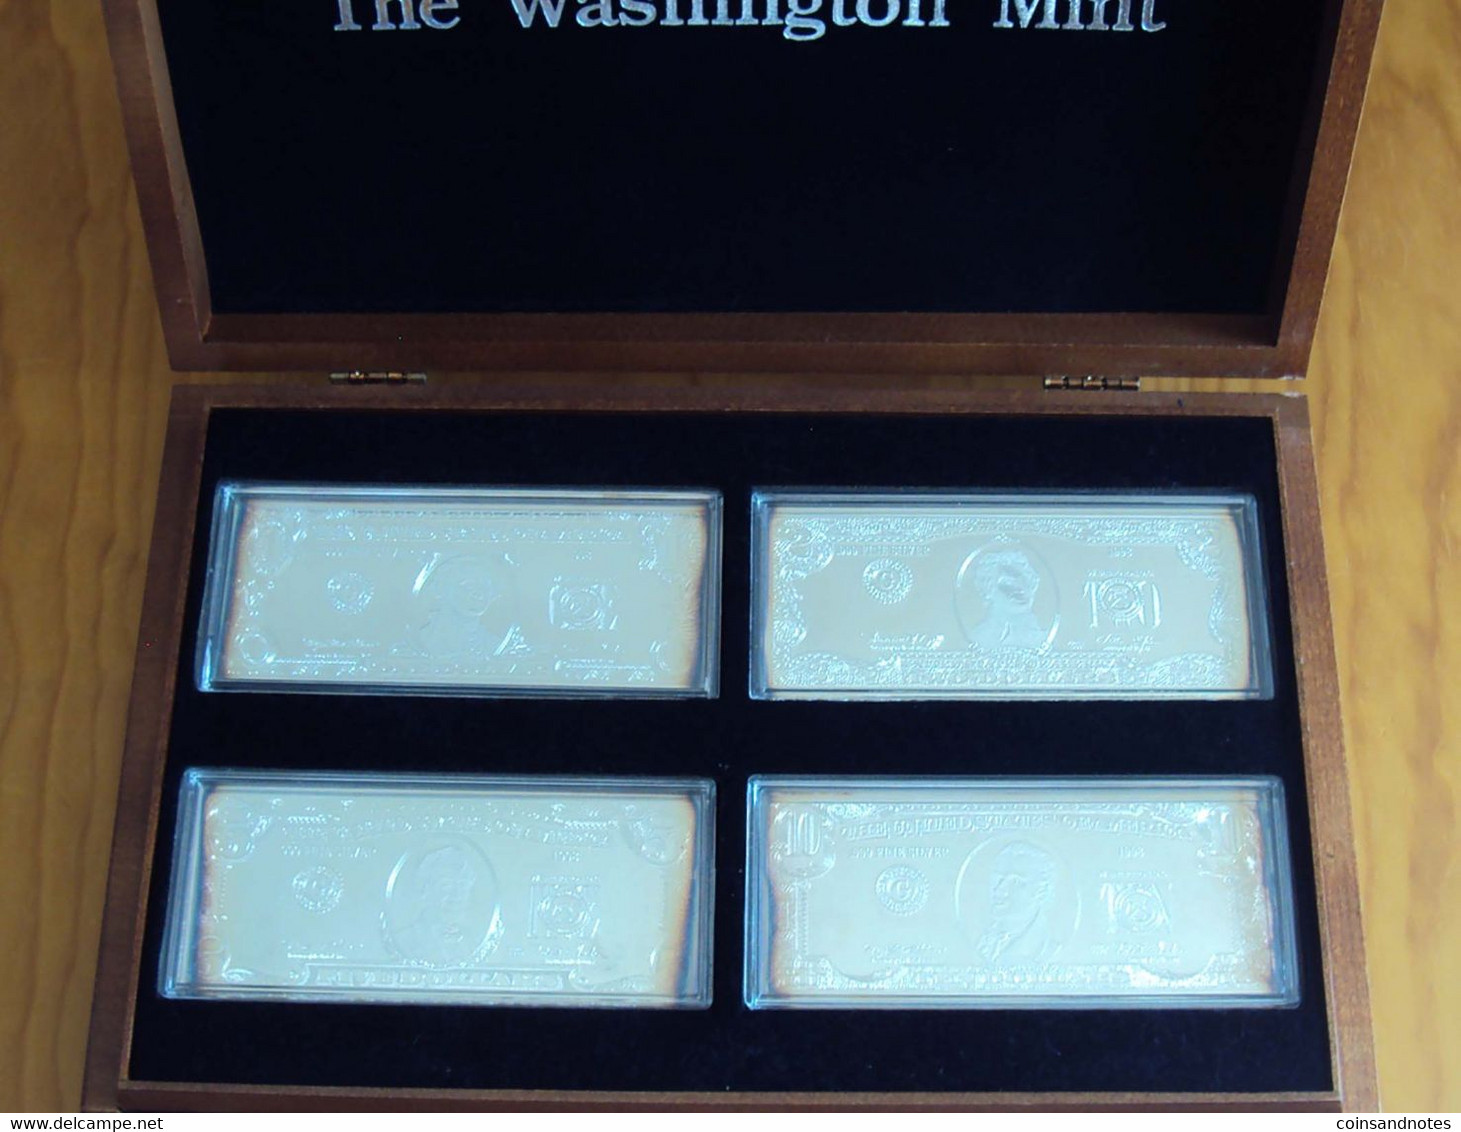 USA 1998 - The Washington Mint - Wooden Box 7 X 4 Troy Oz Silver Banknotes - Proof - Colecciones